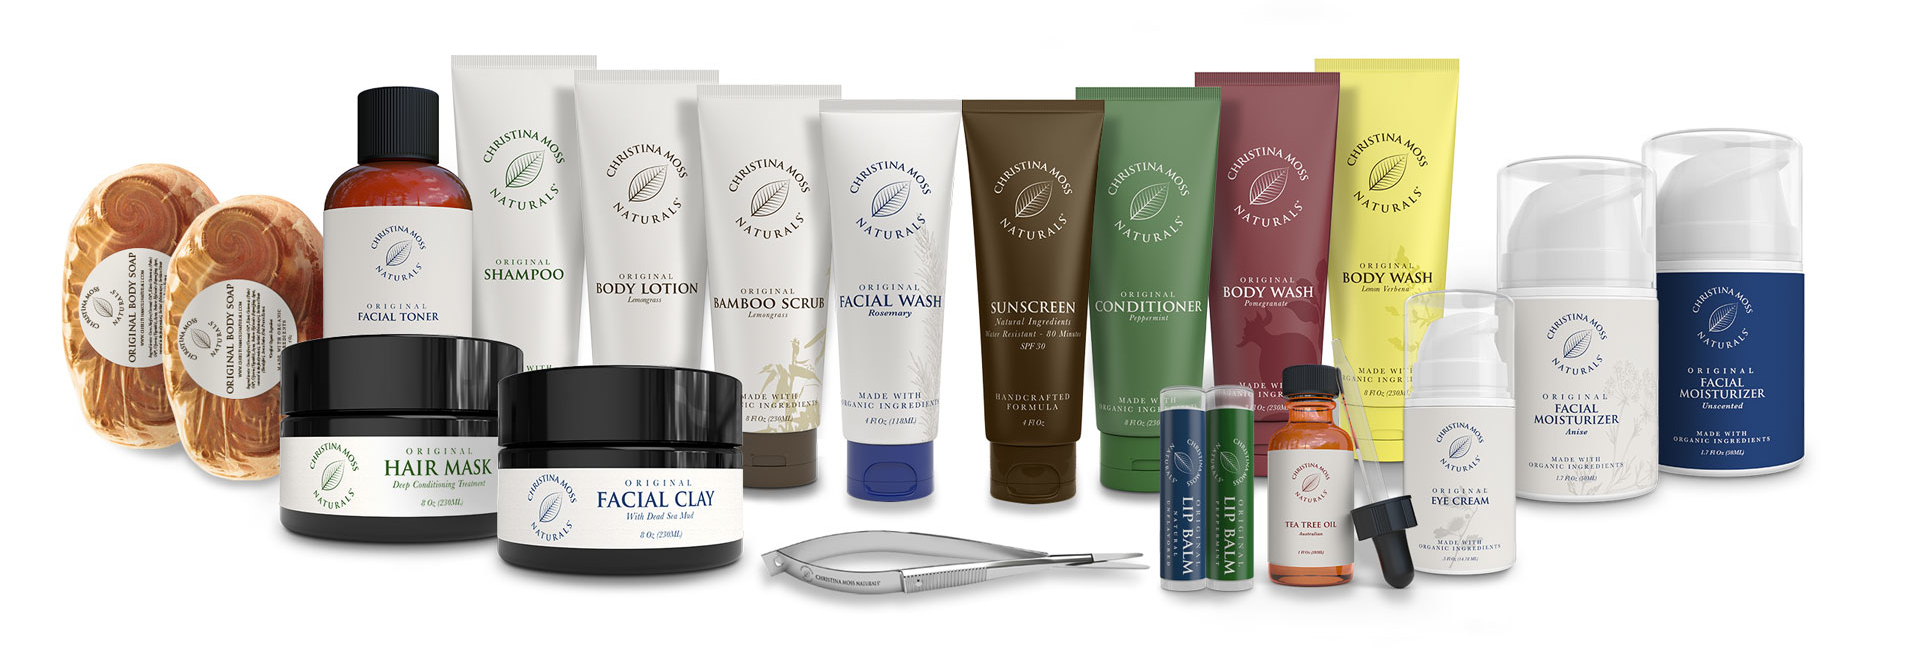 Christina Moss Naturals All Products Image